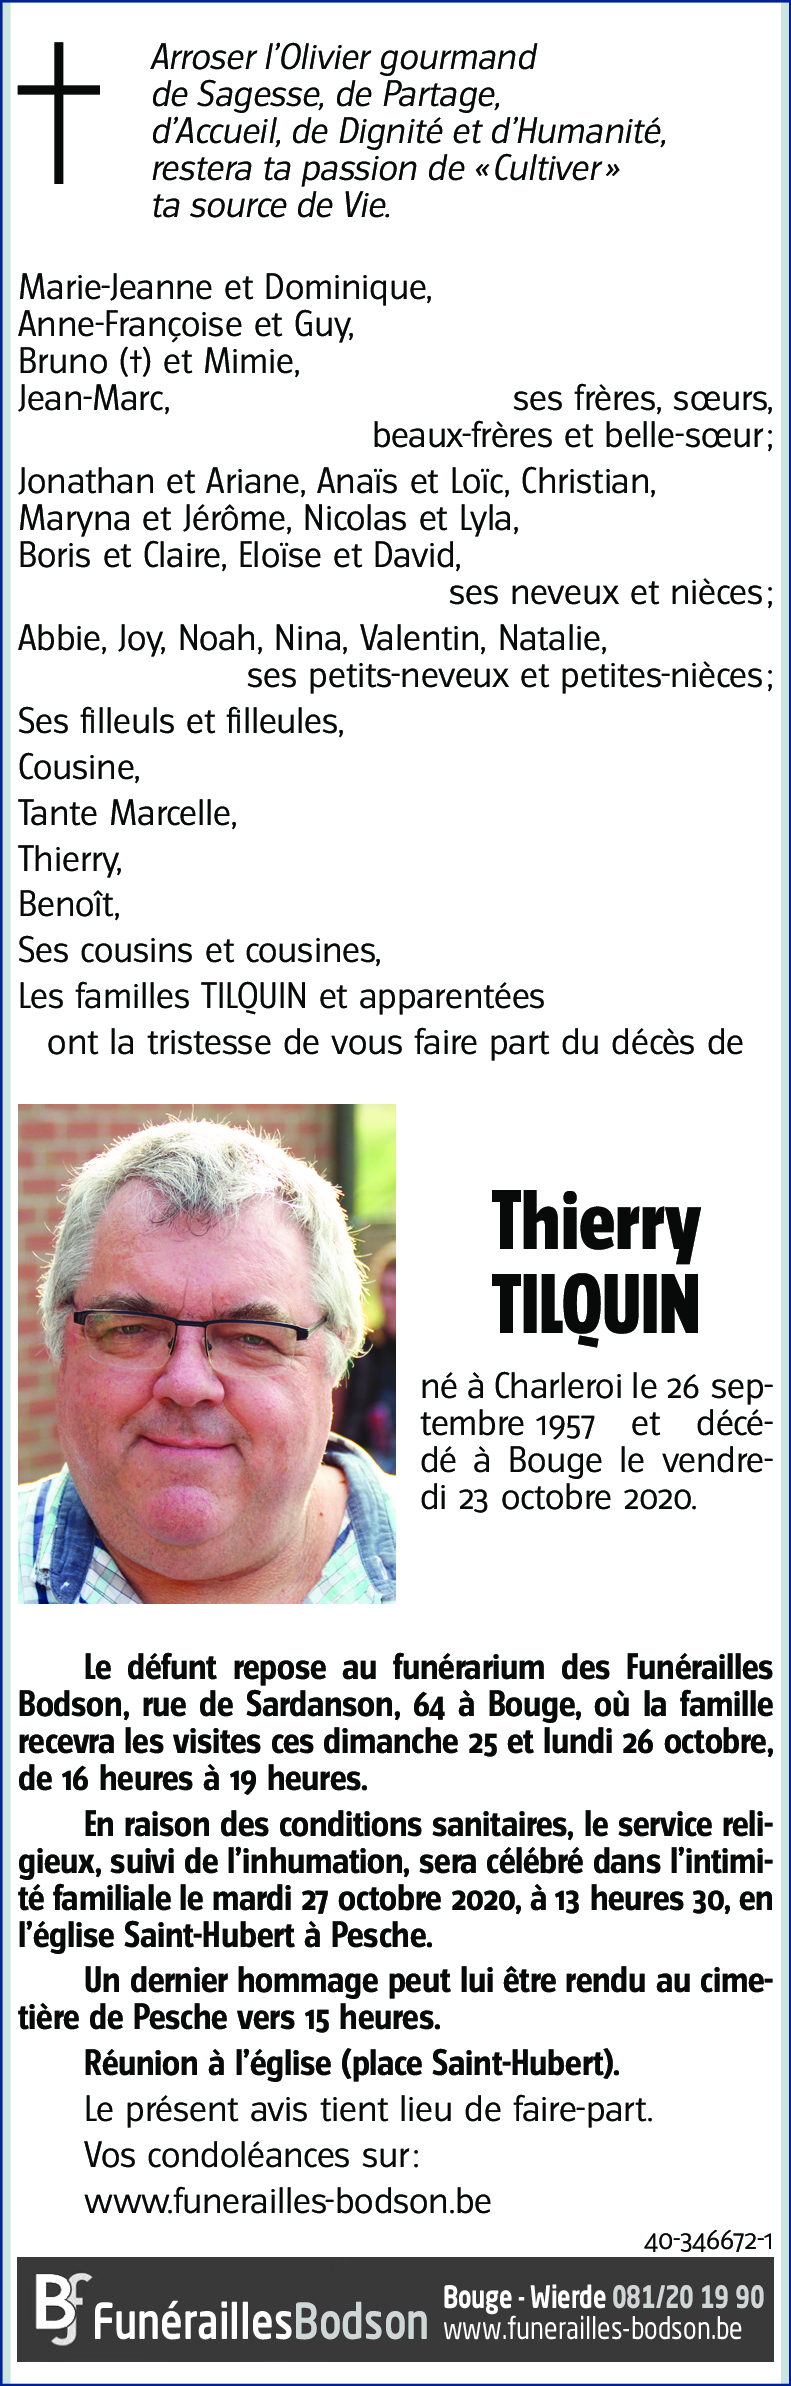 Thierry TILQUIN